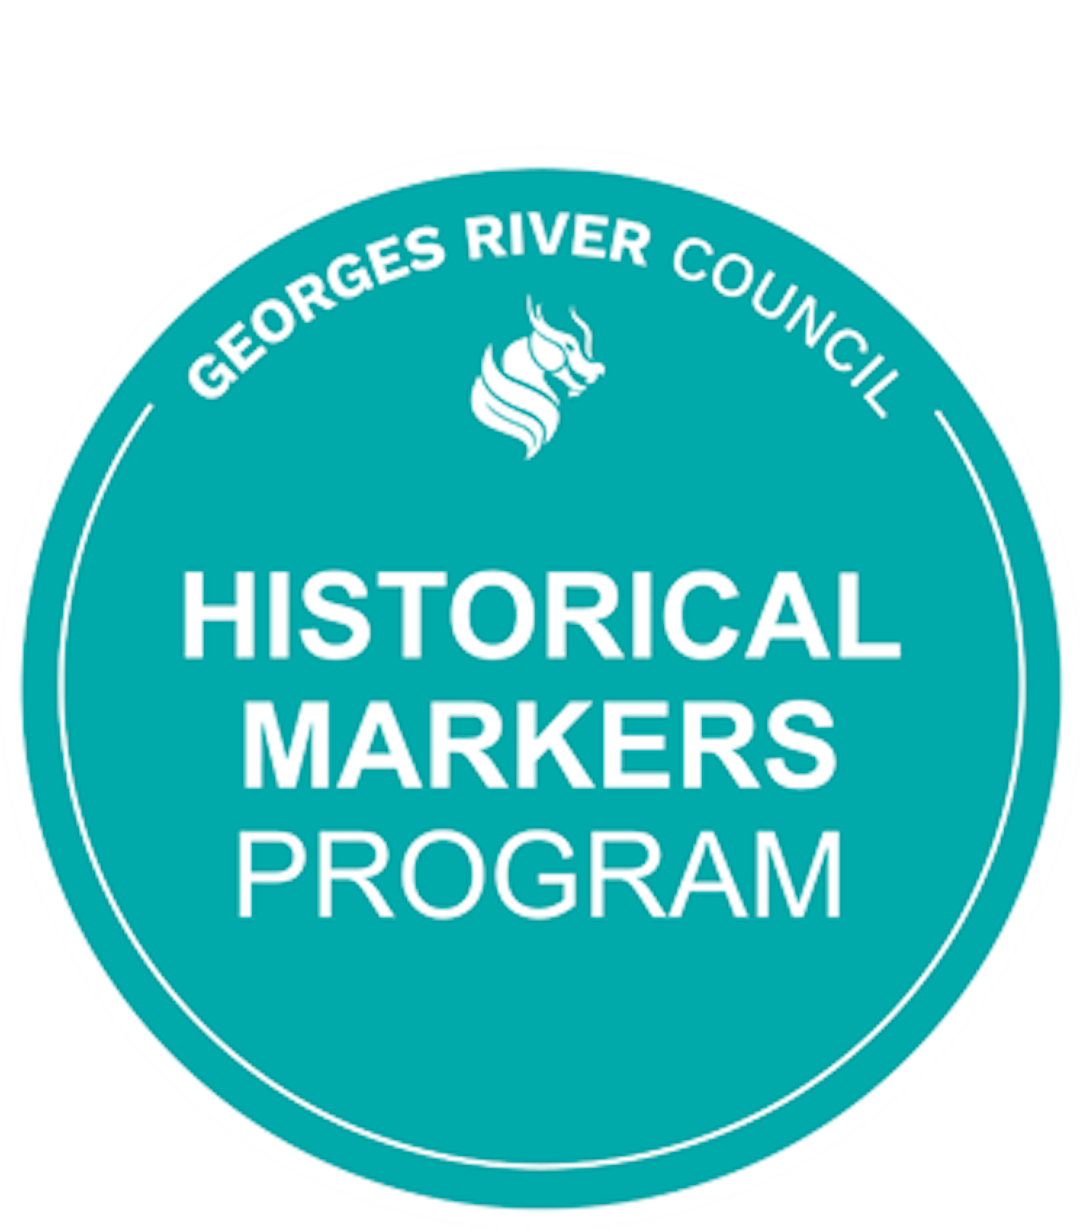 Georges River Council is pleased to announce that the 2020 Historical Markers Program is now open for applications!
This initiative, launched in 2018, highlights and recognises people and places of historical and cultural importance, as recommended by the local community. Members of the community are encouraged to nominate a site or person of historical significance to the Georges River area.
